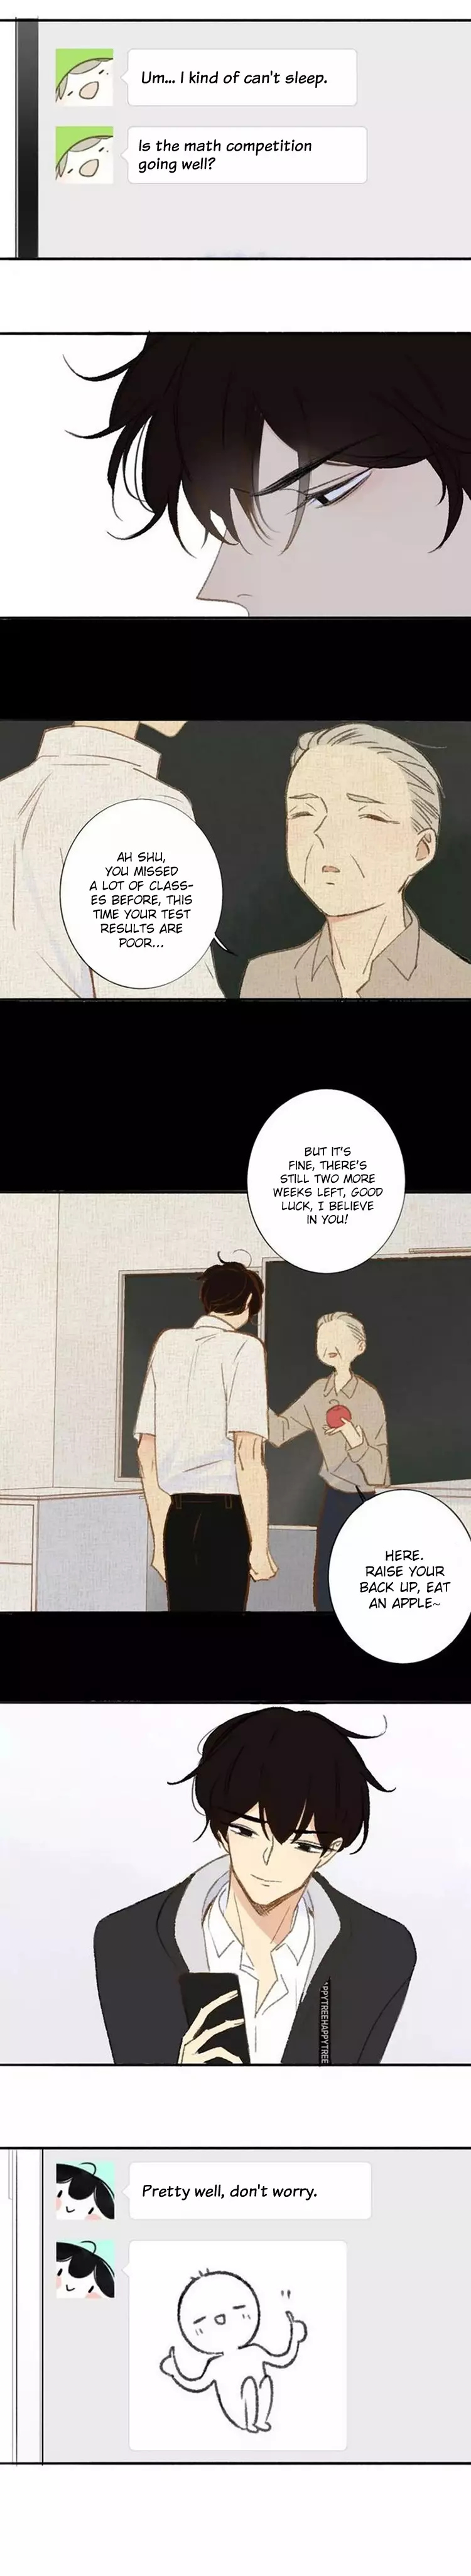 Classmate Relationship? - 117 page 6-48647ca1